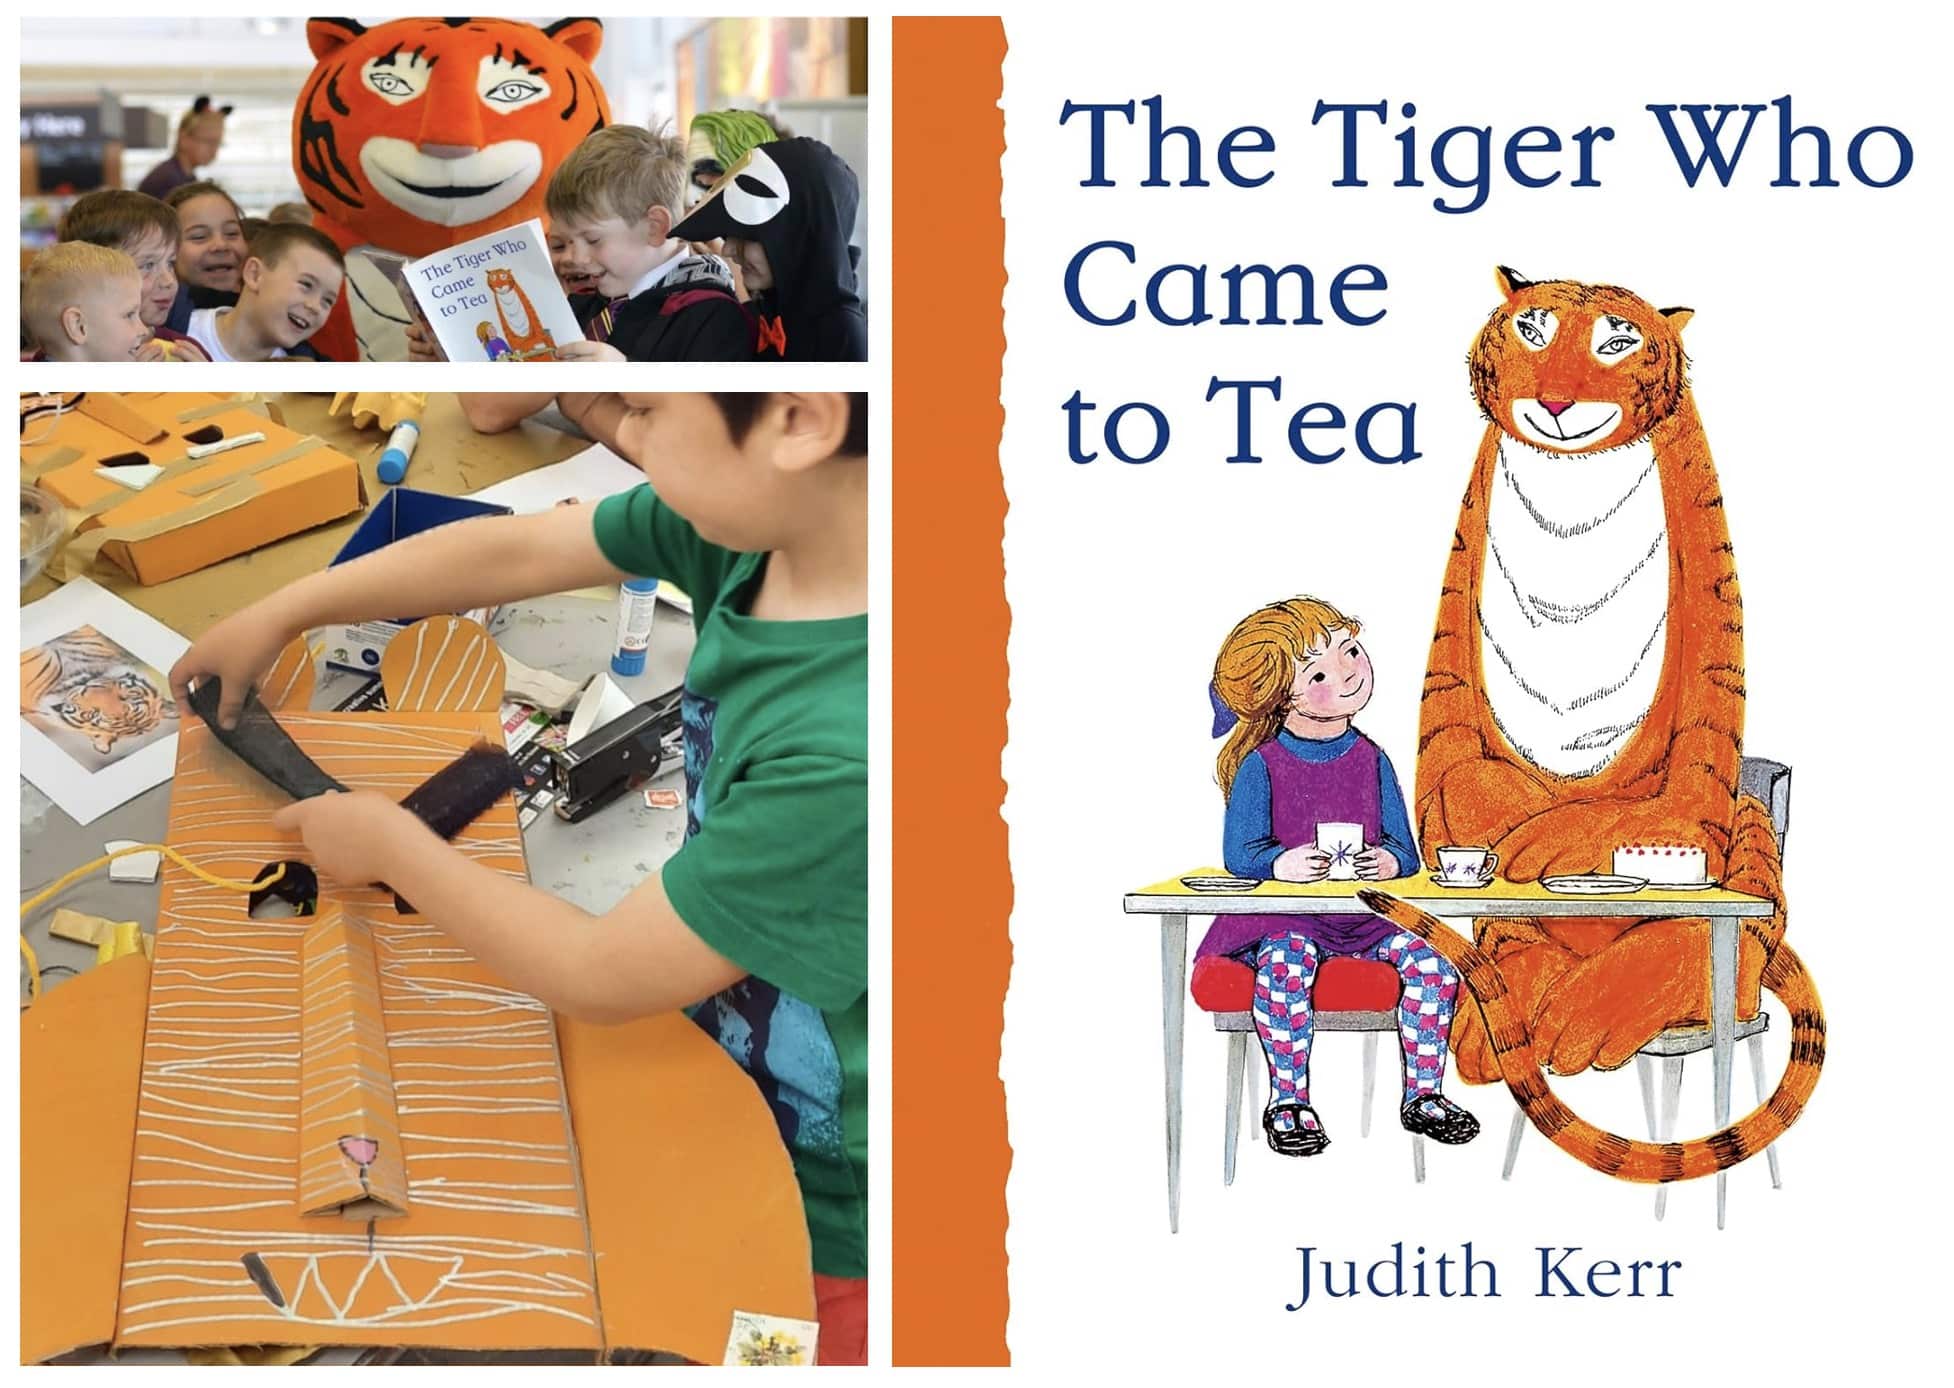 The Tiger who came to Tea